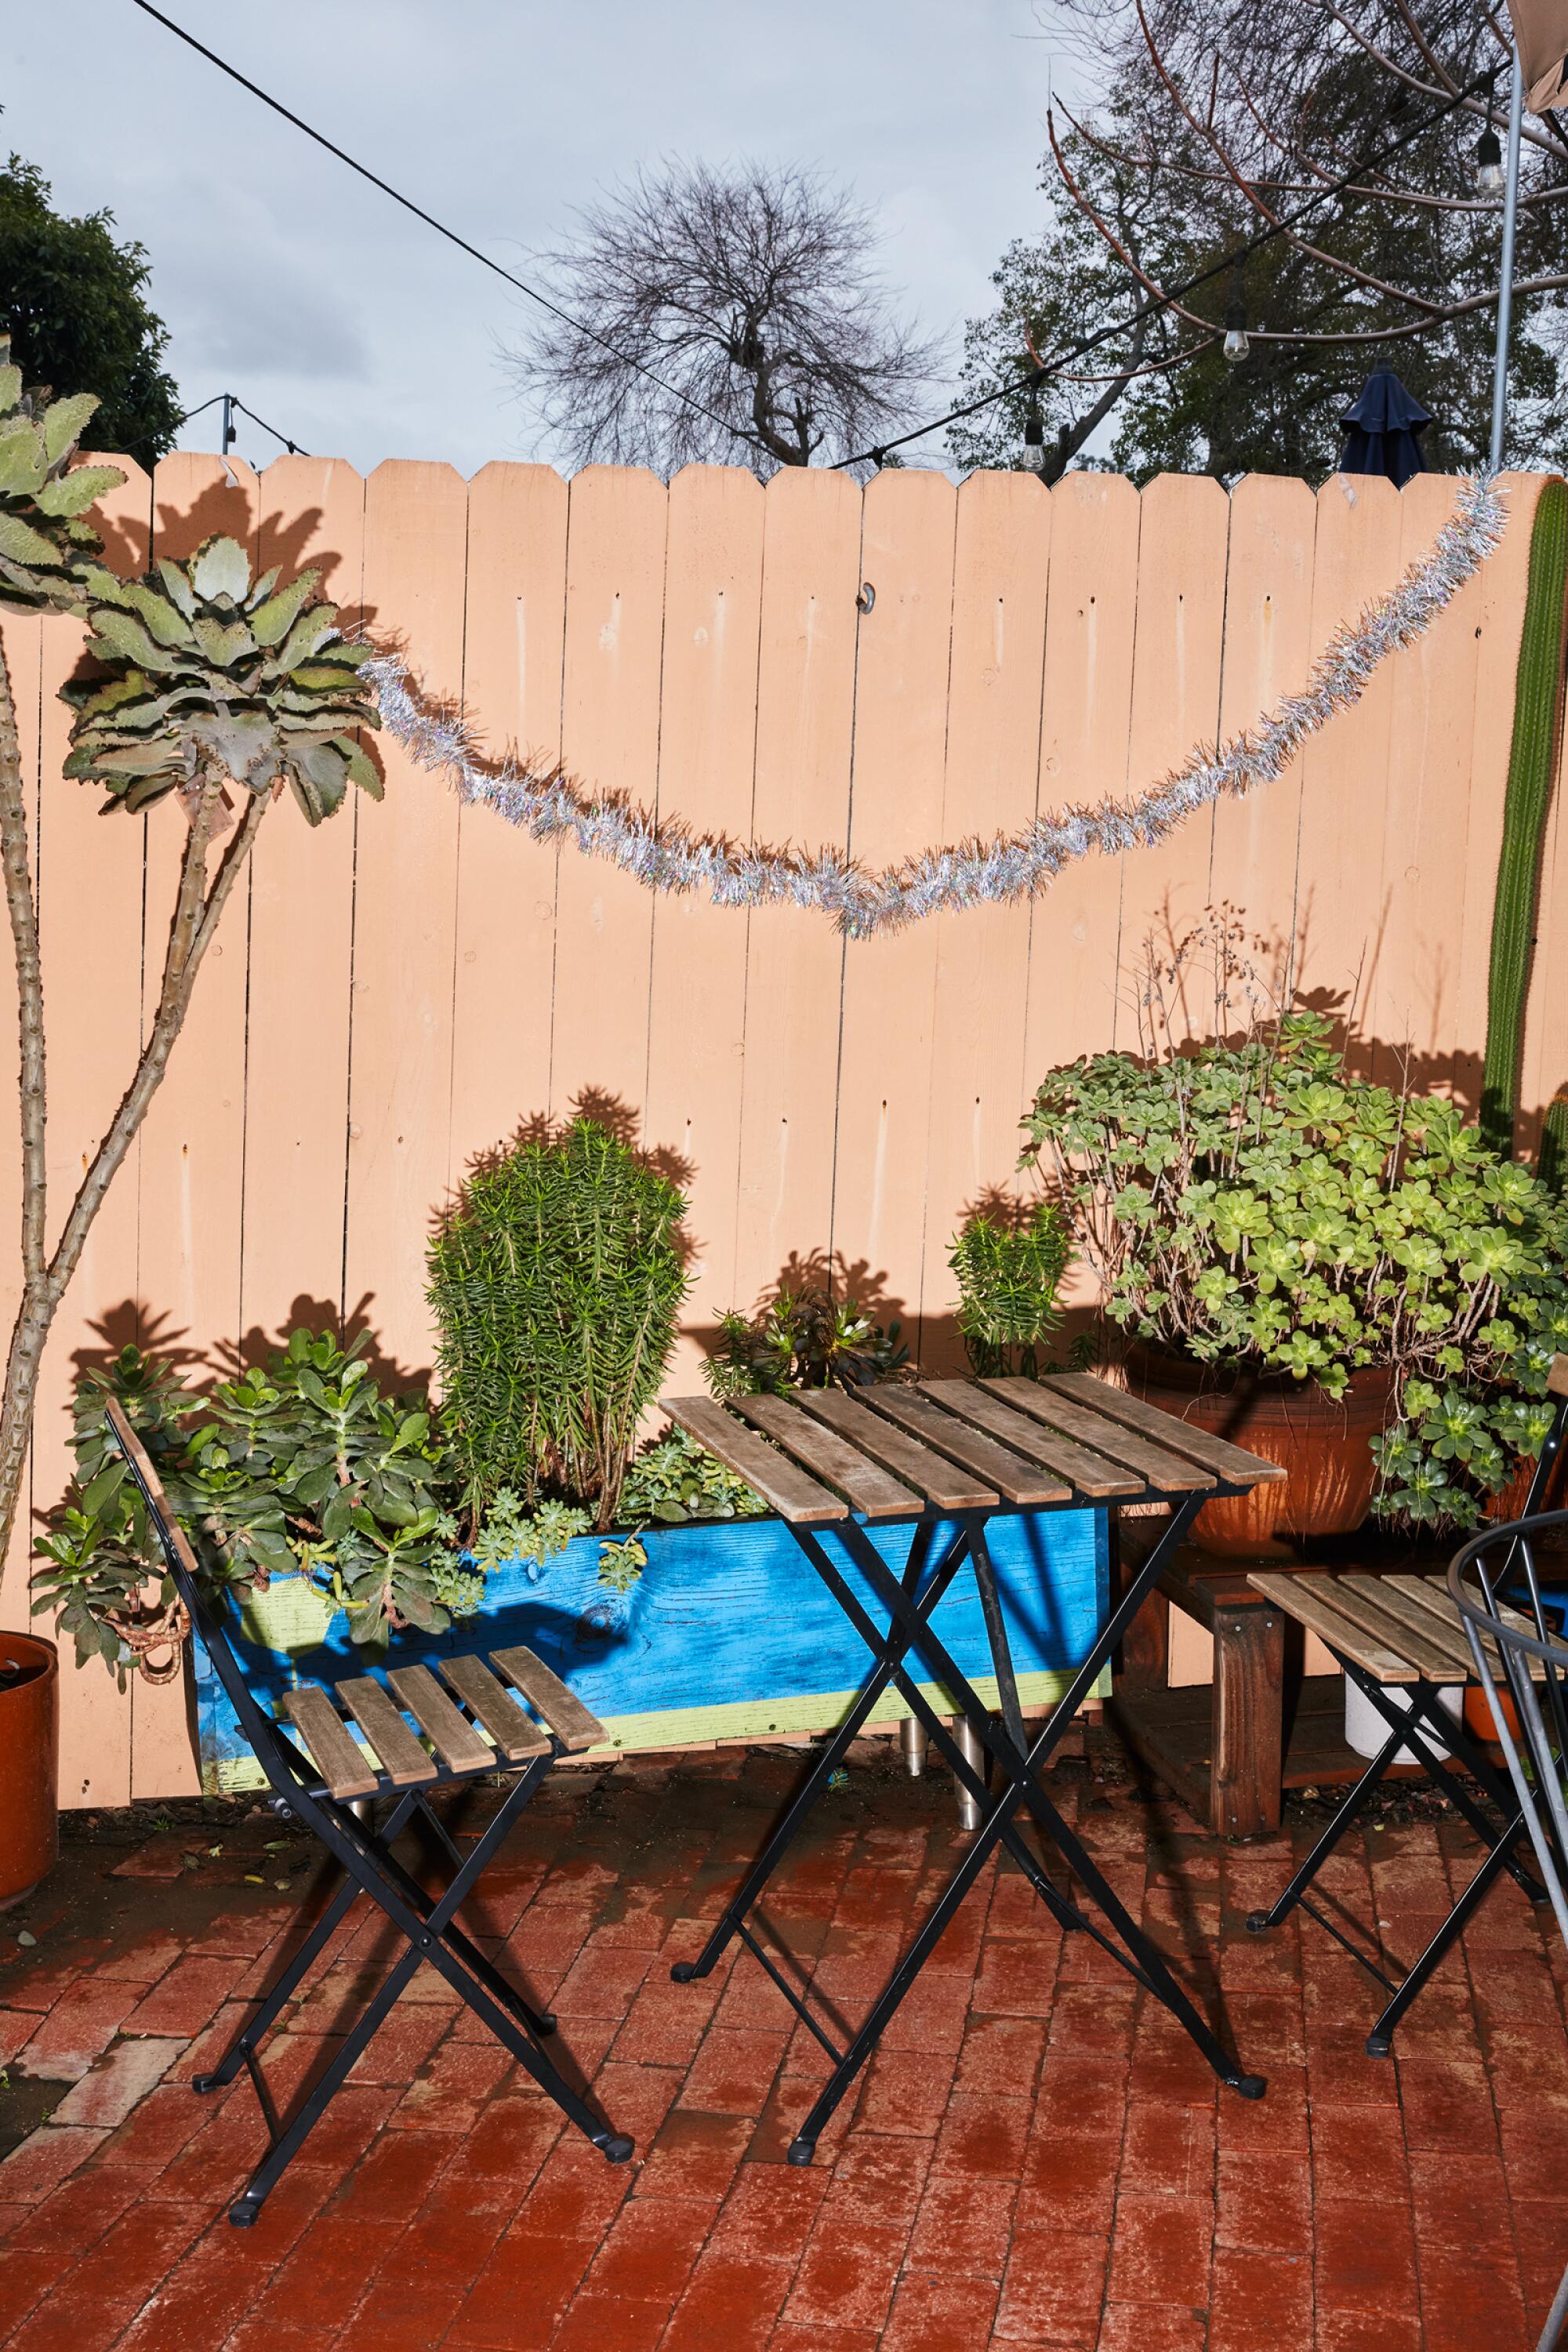 A cafe table and chairs outdoors, next to a wooden fence with potted succulents.